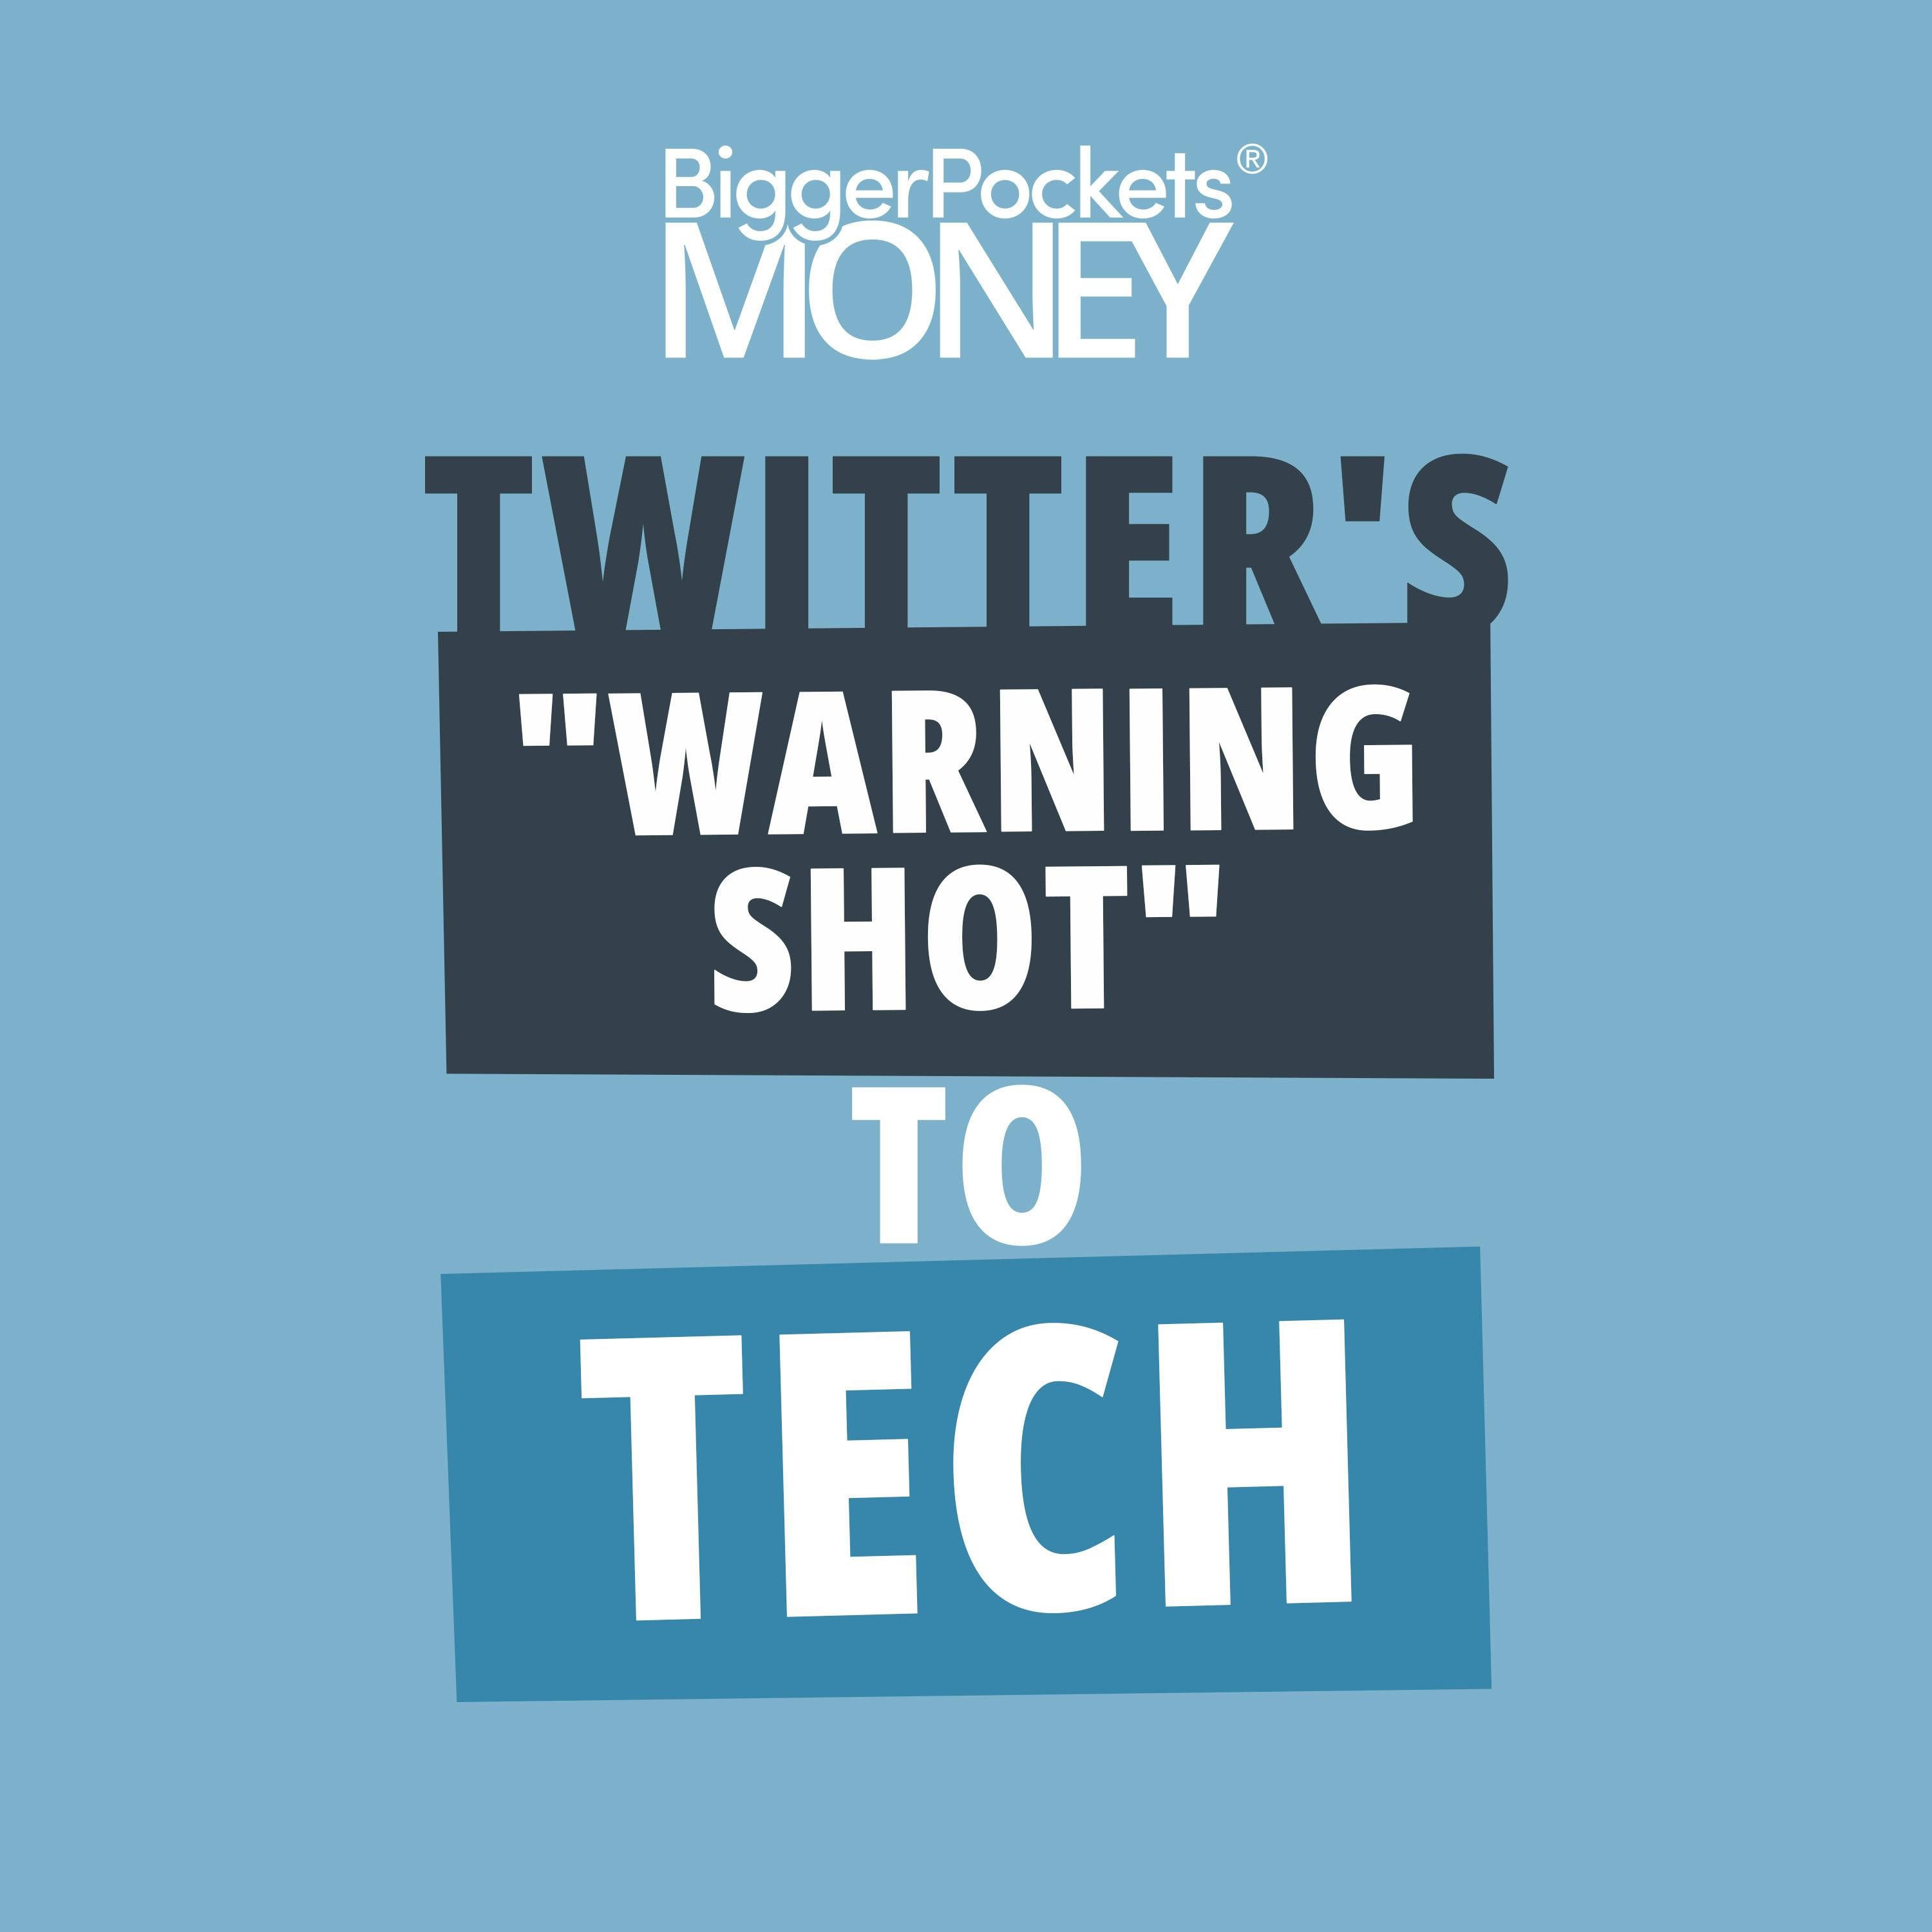 388: Twitter’s “Warning Shot” and What to Look for When Investing in Tech